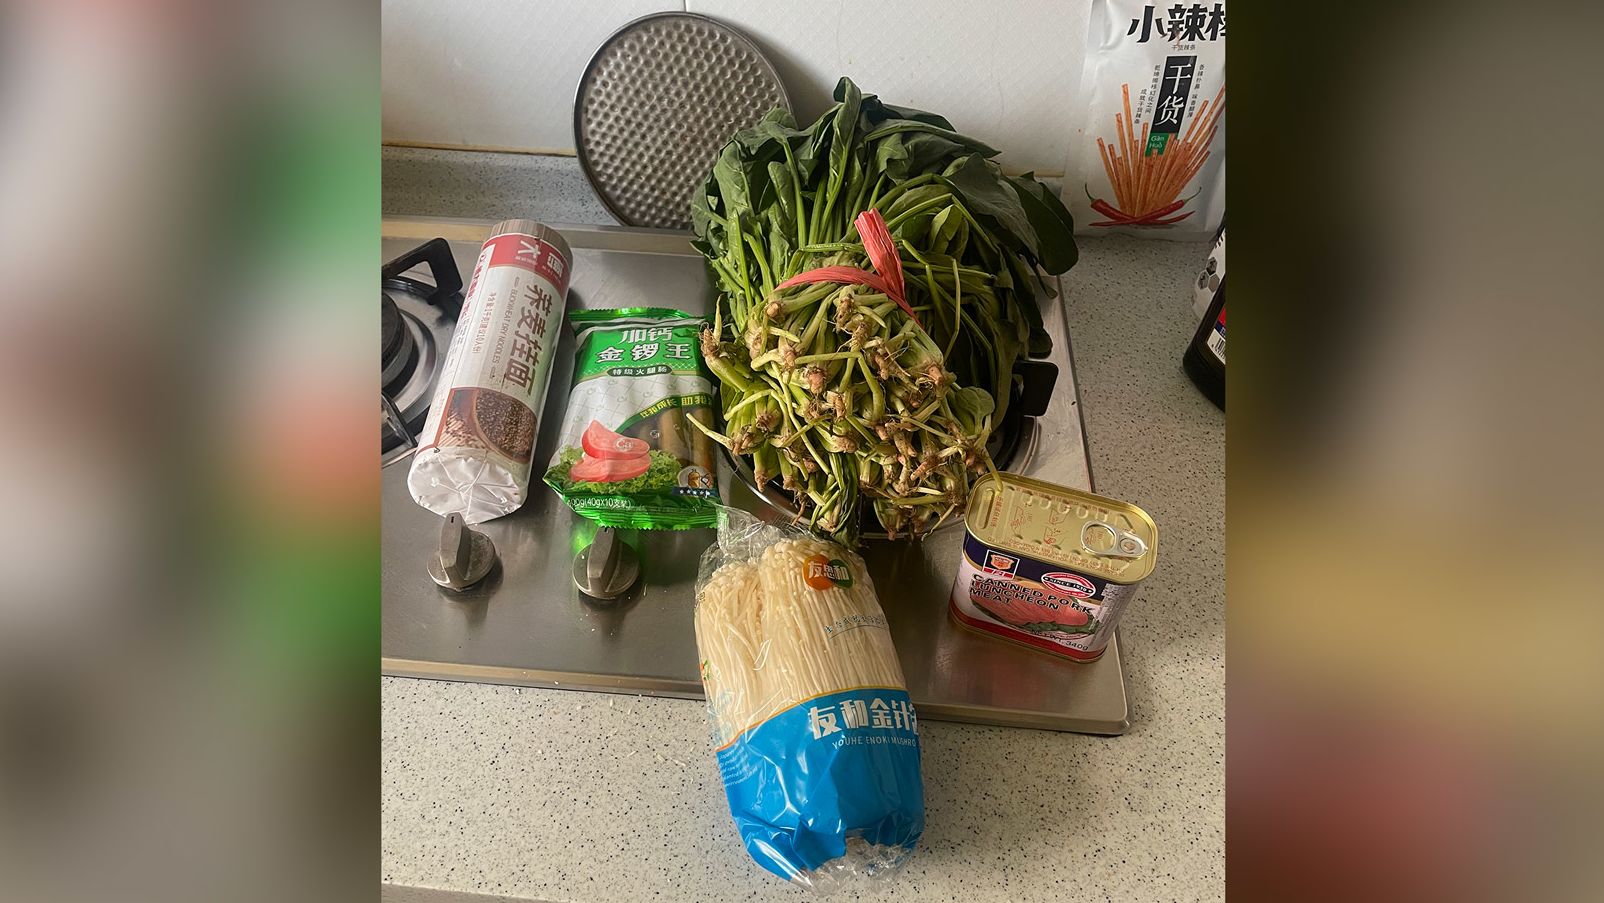 A government food package sent to Shanghai residents Rodrigo Zeidan and Melissa Nogueira, including noodles, sausages, spinach, mushrooms, SPAM. 